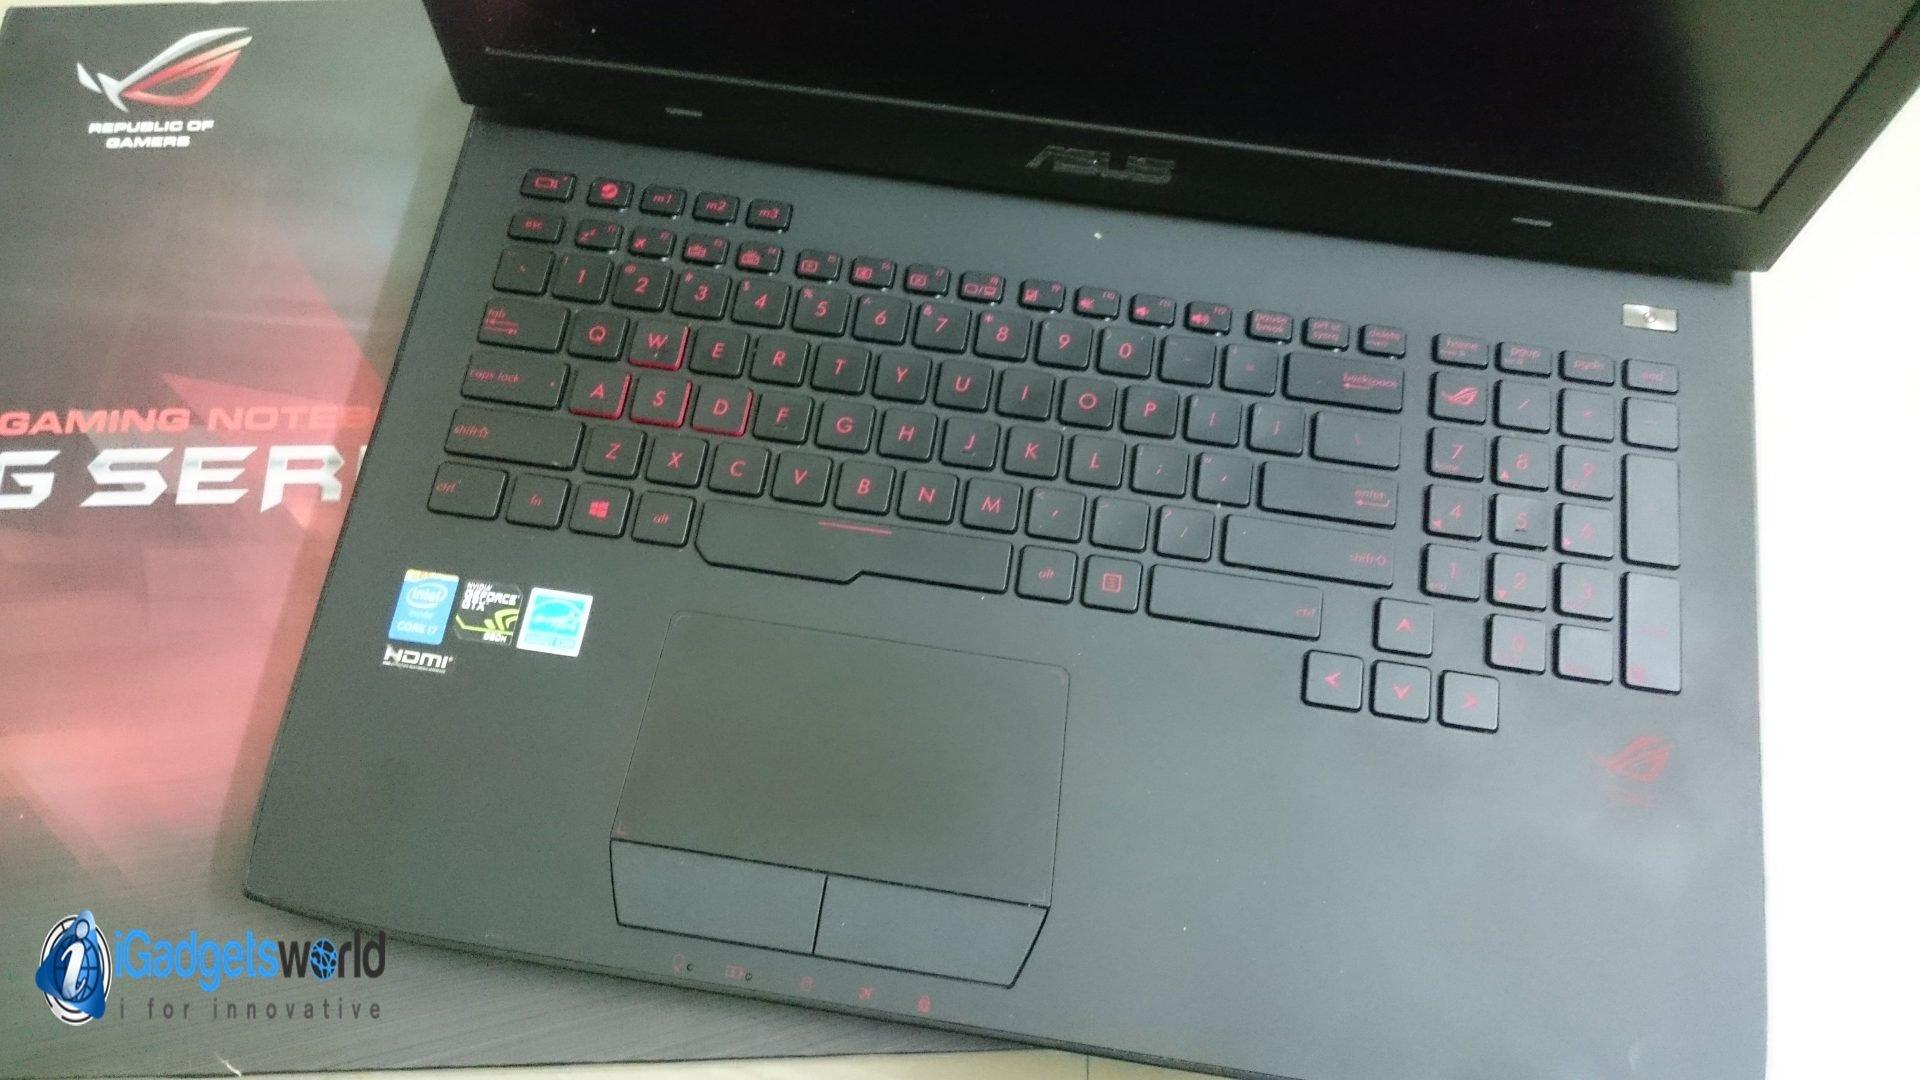 Asus ROG G751J Review: A Slightly Overpriced Ultra High-End Gaming Laptop - 21